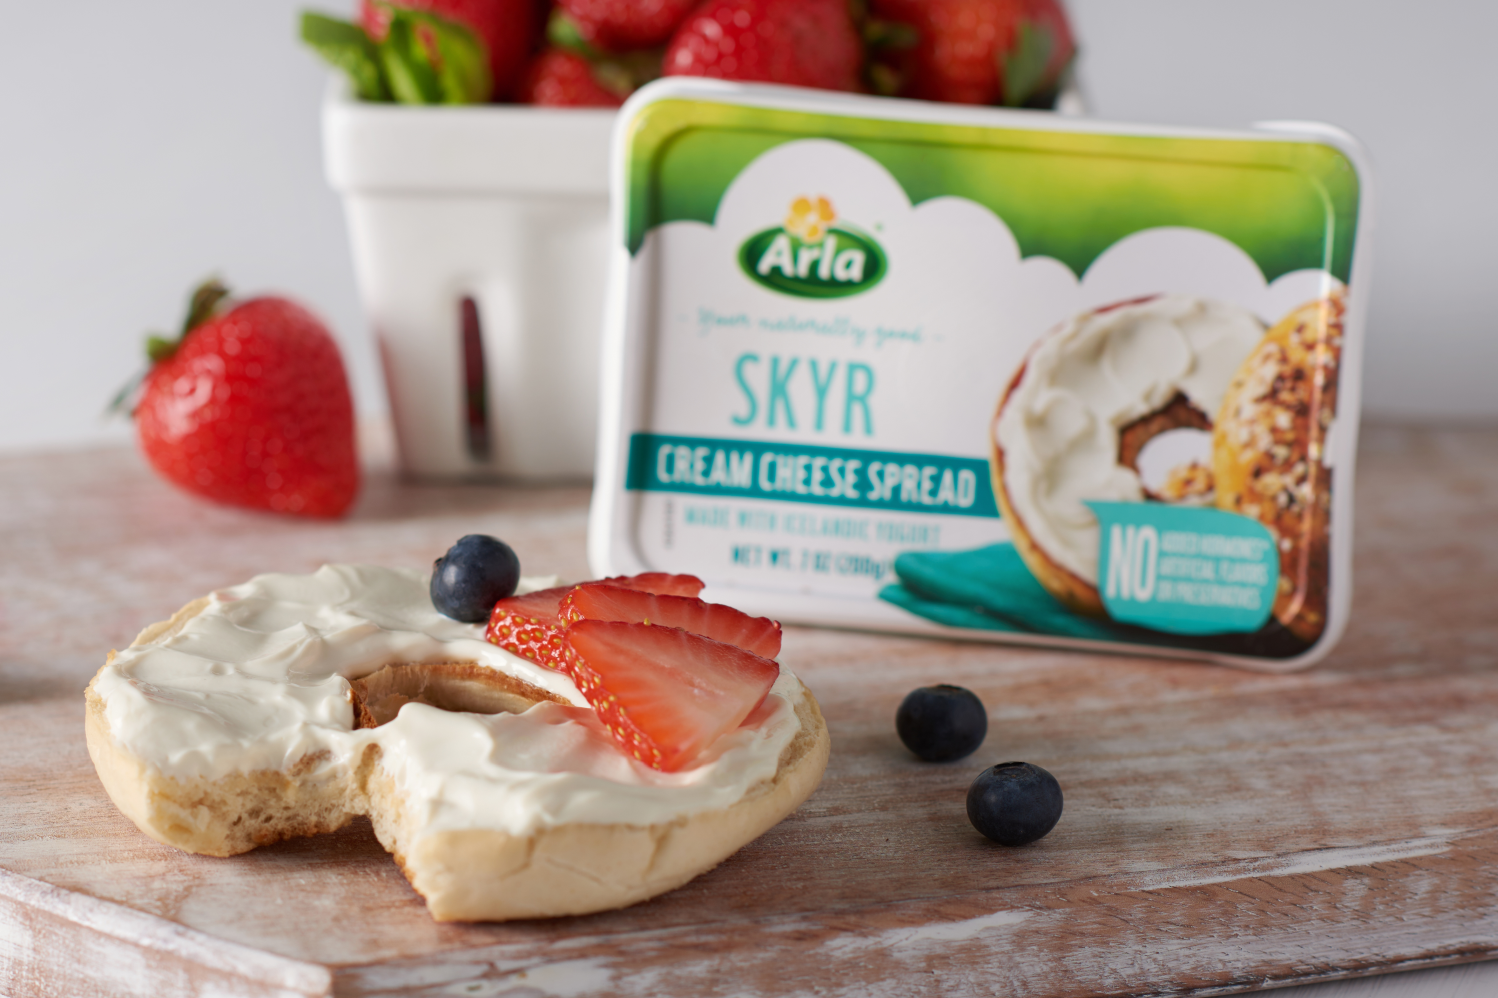 early cream Arla adoption to that on skyr in line: introduces cheese \'We\'re trying get